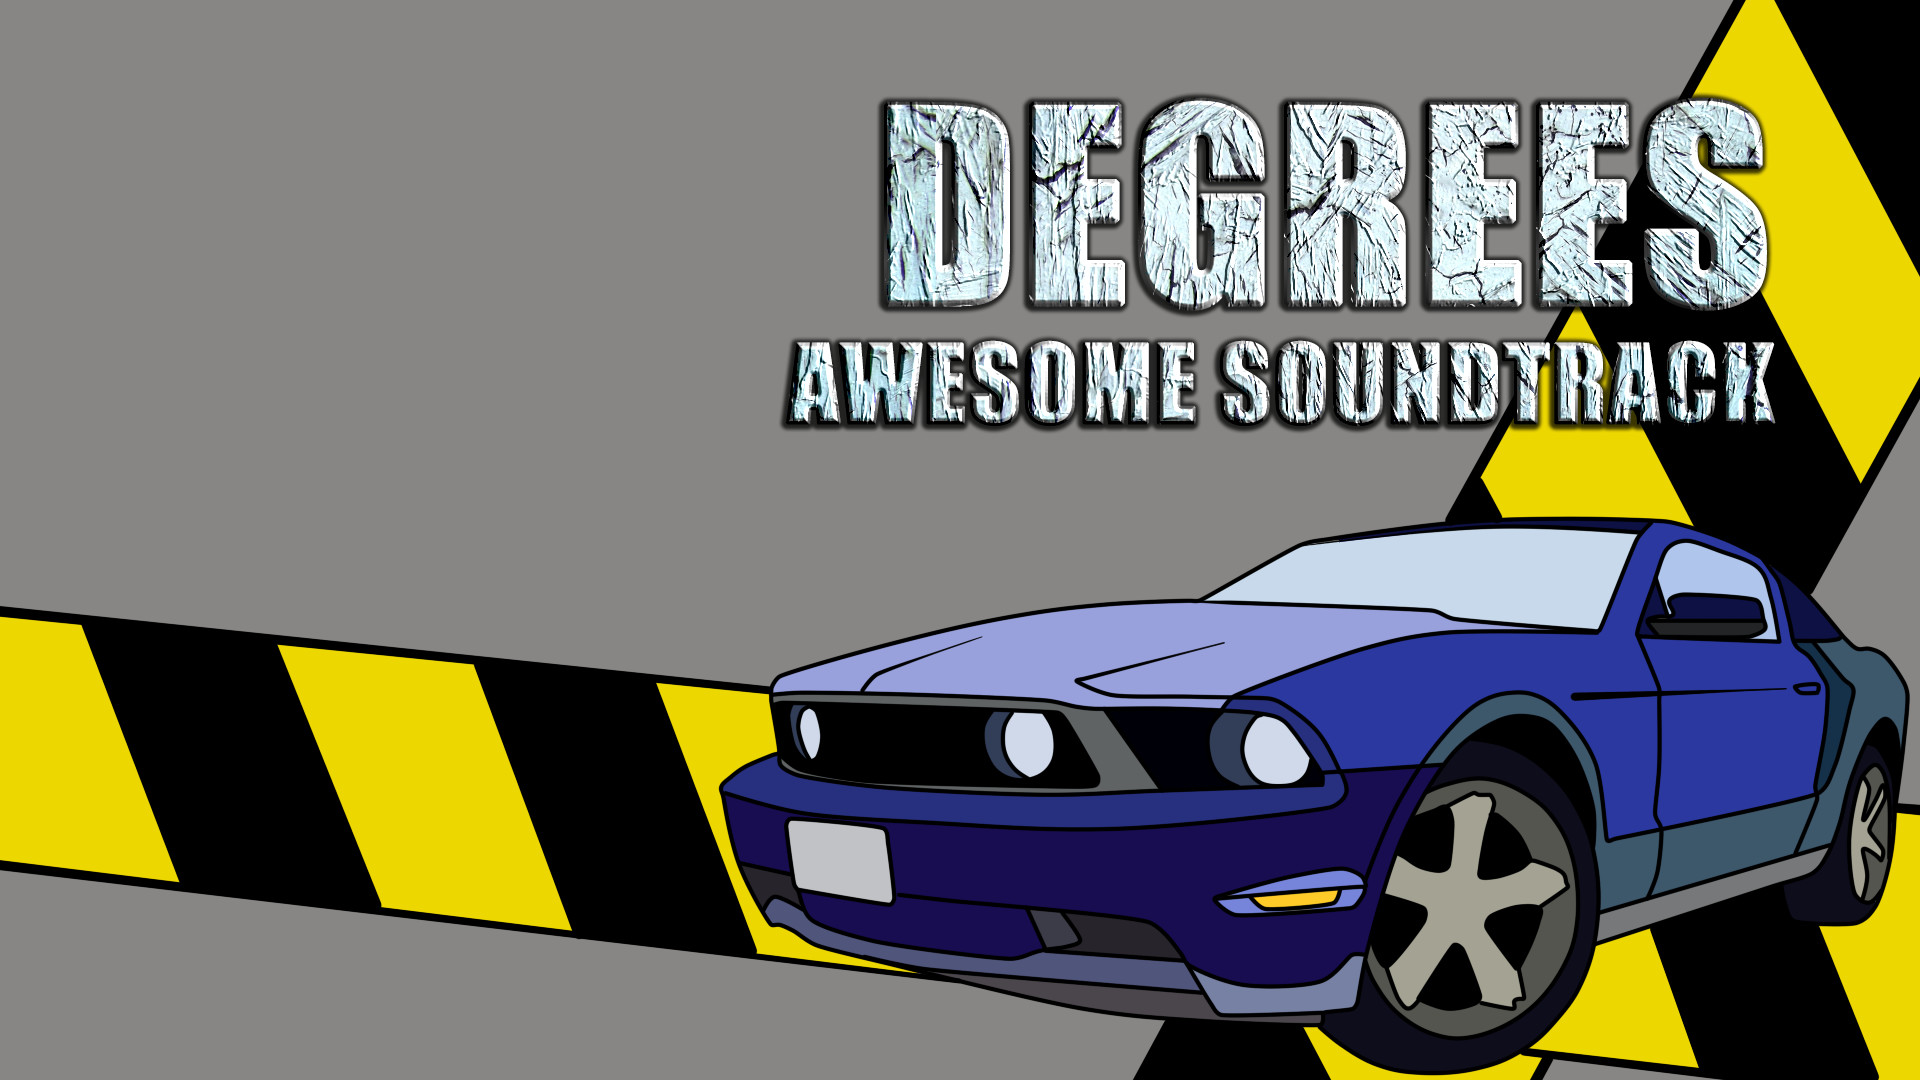 Degrees Awesome Soundtrack Featured Screenshot #1